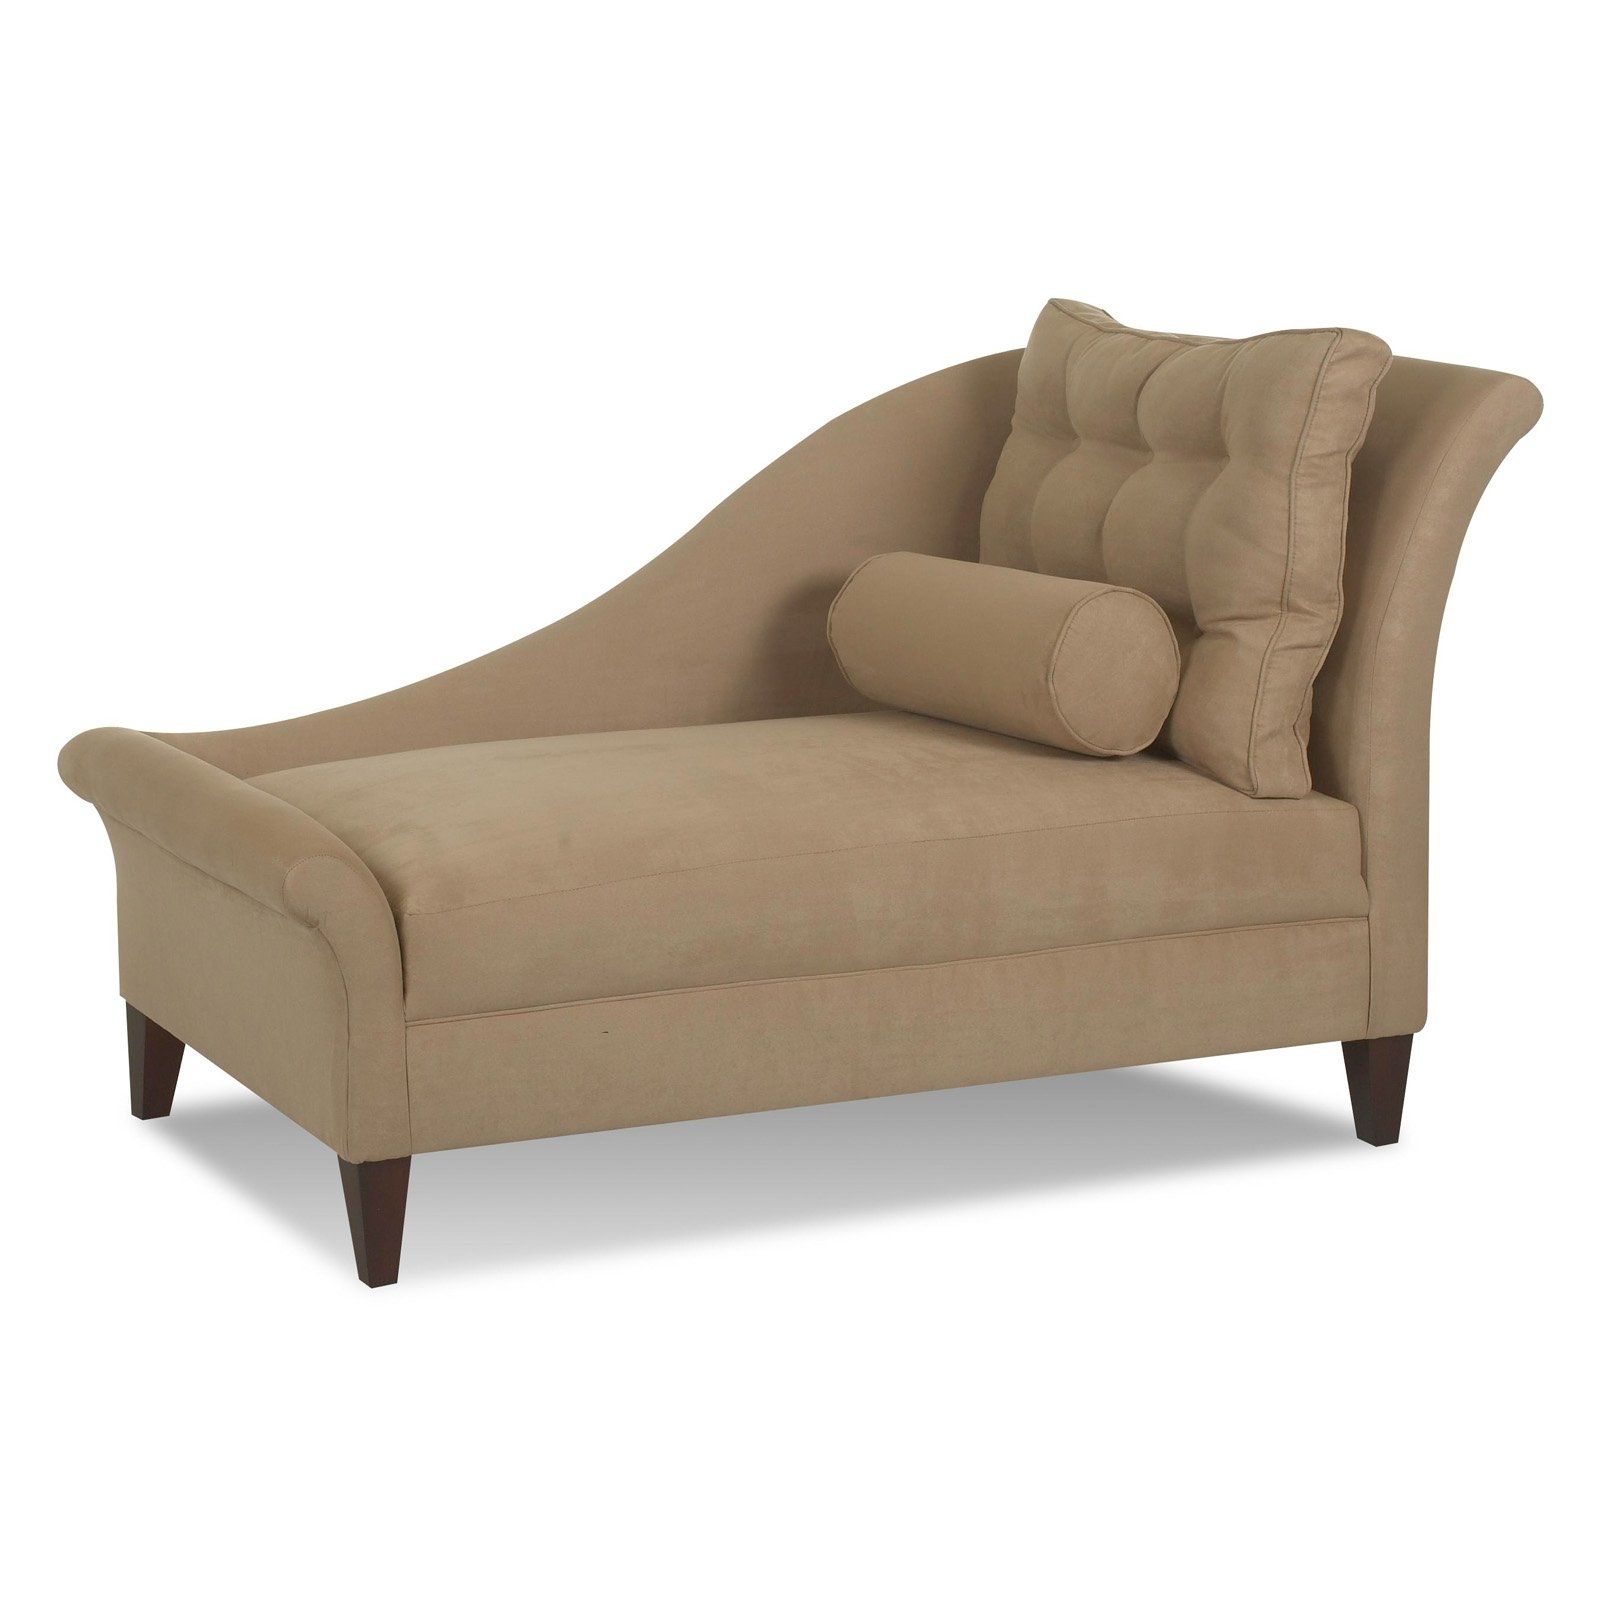 Most Current Arm Chaise Lounge Chairs – Left Arm Chaise Lounge Chaise Design In Right Arm Chaises (View 15 of 15)